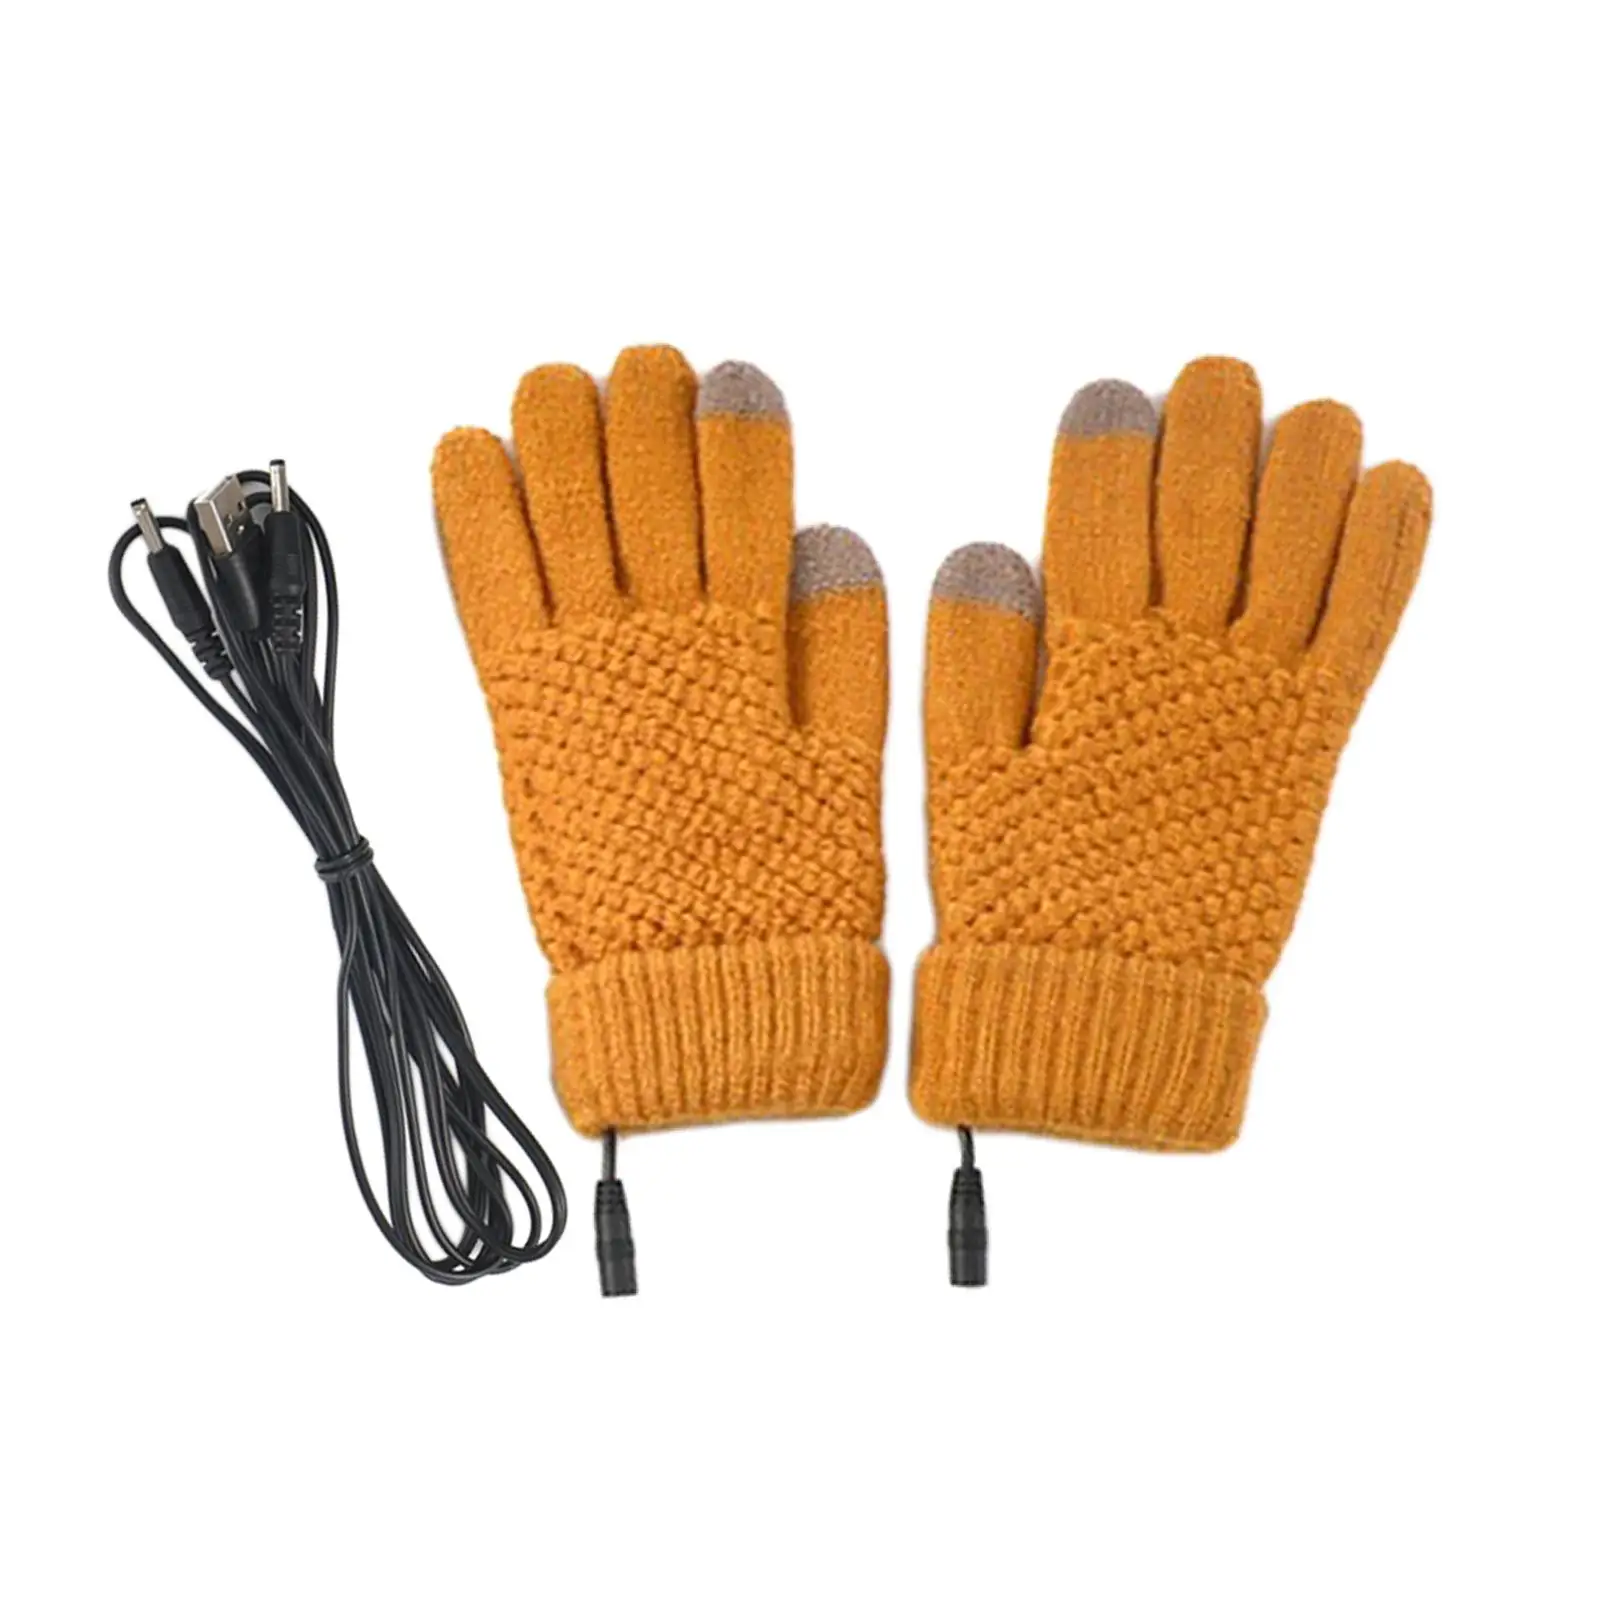 USB Heated Gloves Connected to Laptop Adapter for Power Hands Warmer Heating Mittens for Cycling Camping Typing Outdoor Skiing